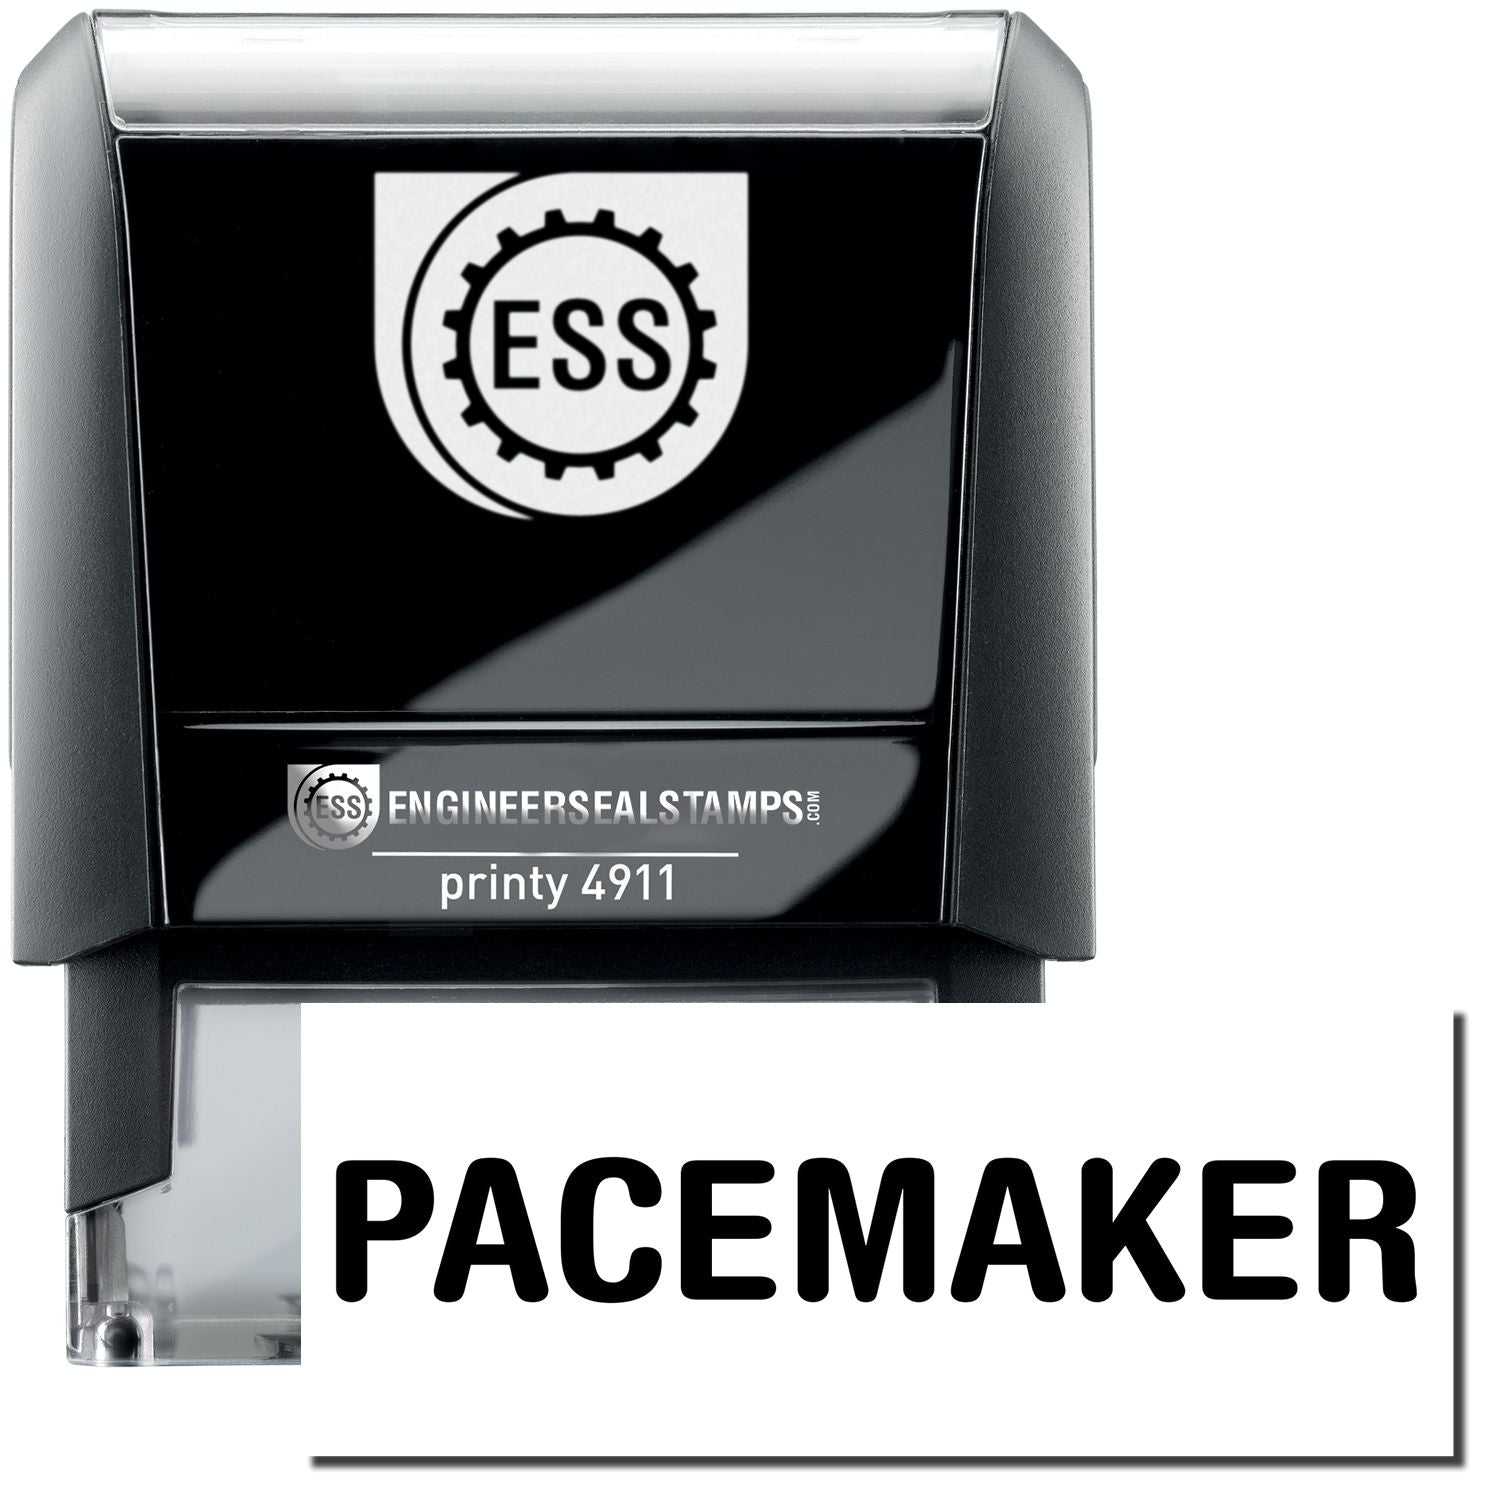 A self-inking stamp with a stamped image showing how the text "PACEMAKER" is displayed after stamping.